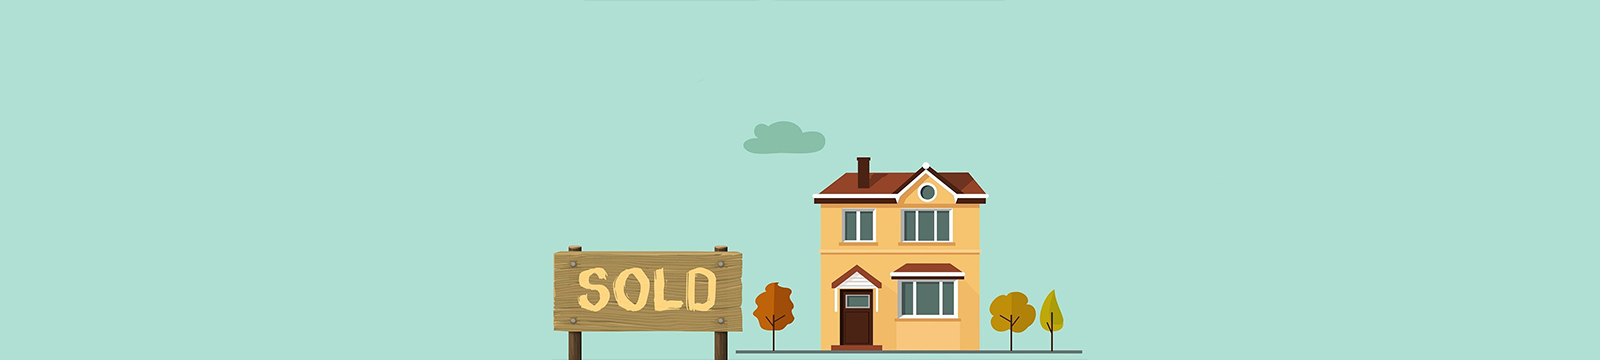 Illustration of home with sold sign in yard. Close up of two hands shaking.